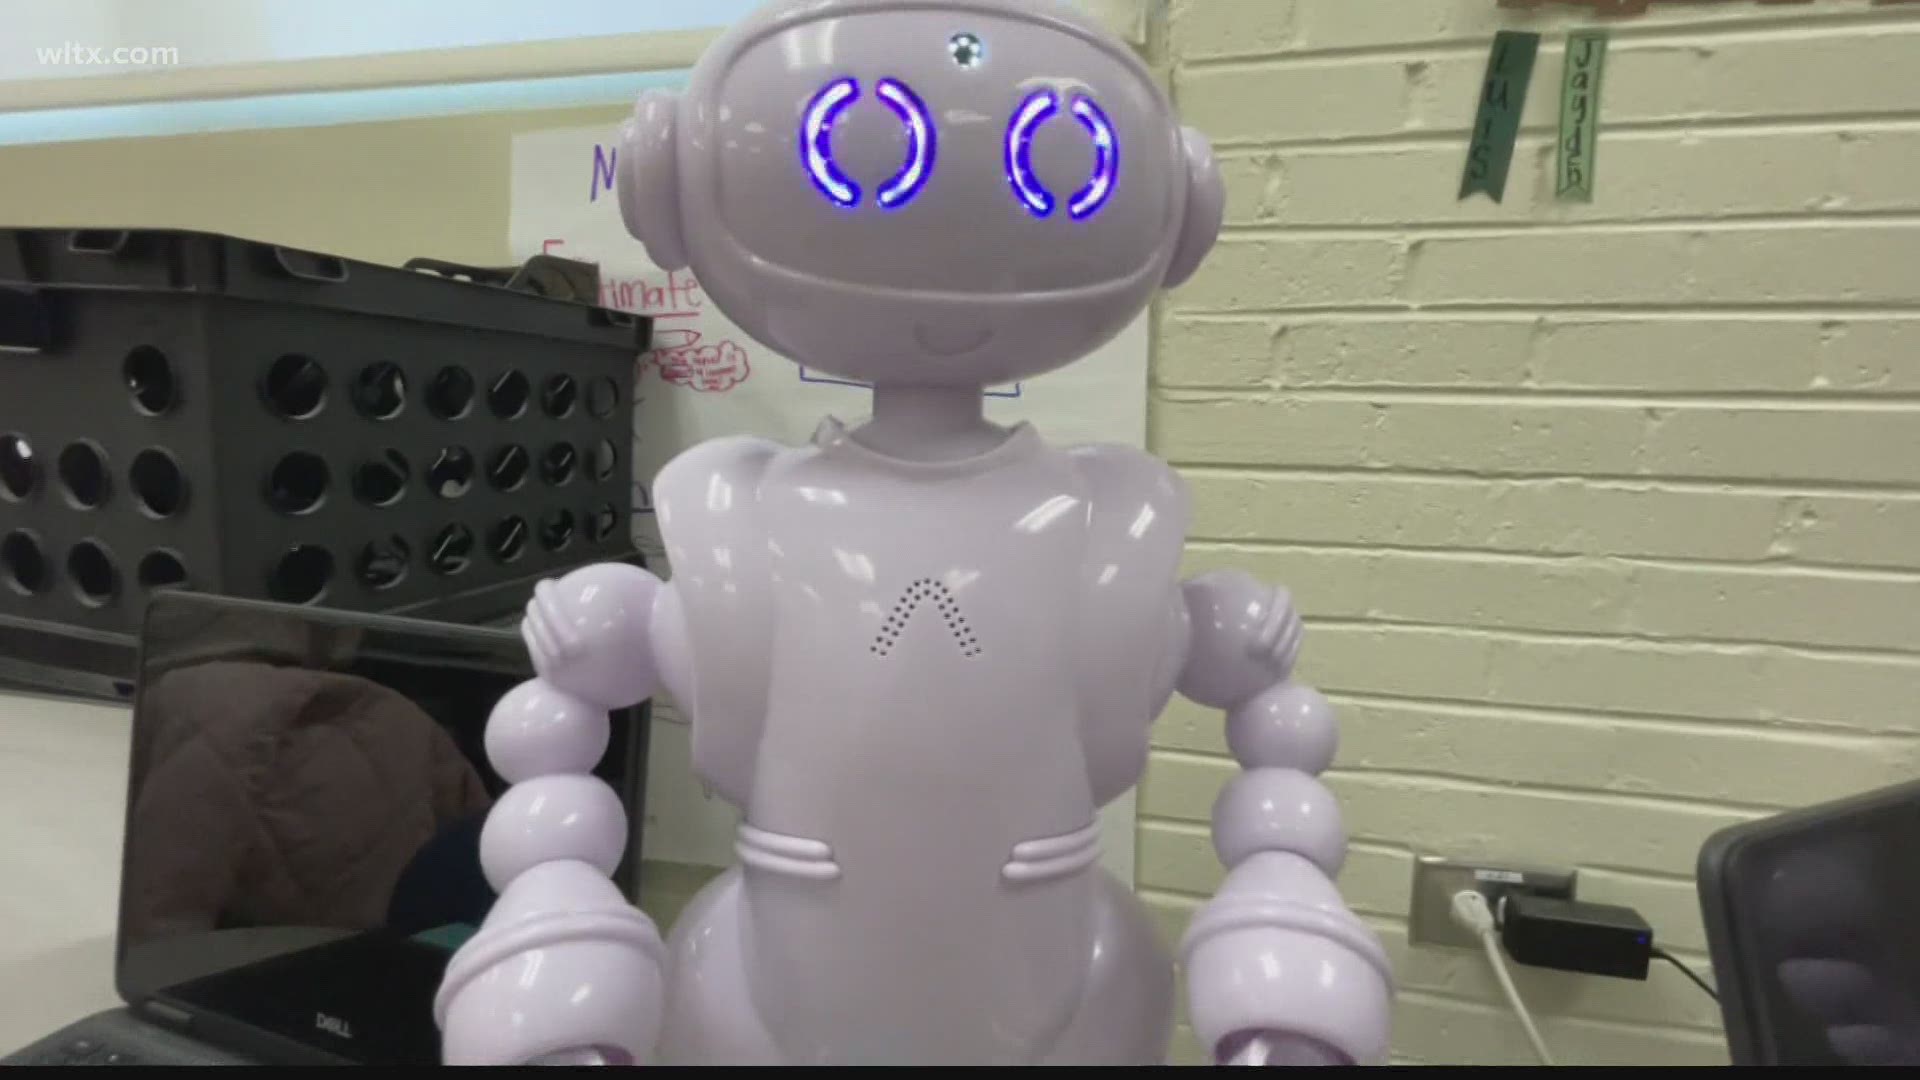 One Lexington Two school is helping students learn by using robots in the classroom.